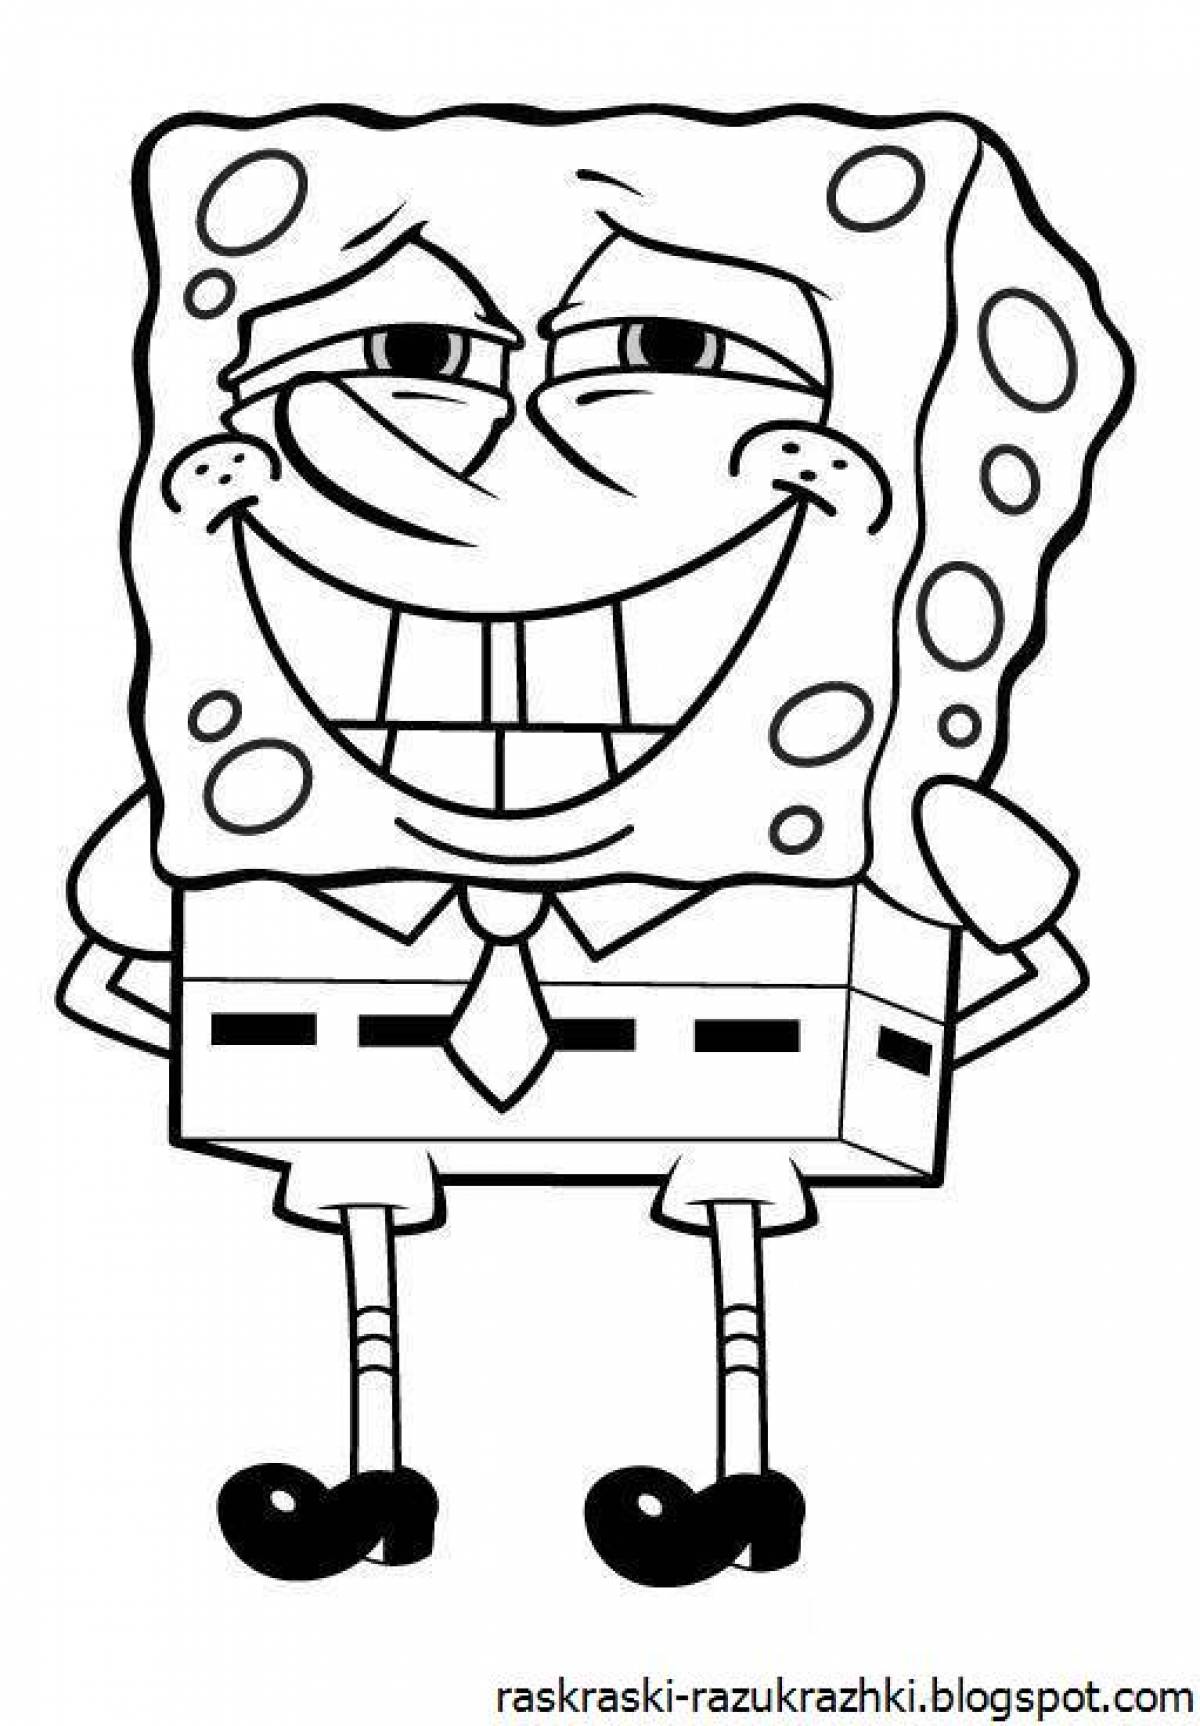 Amazing Spongebob coloring pages for kids